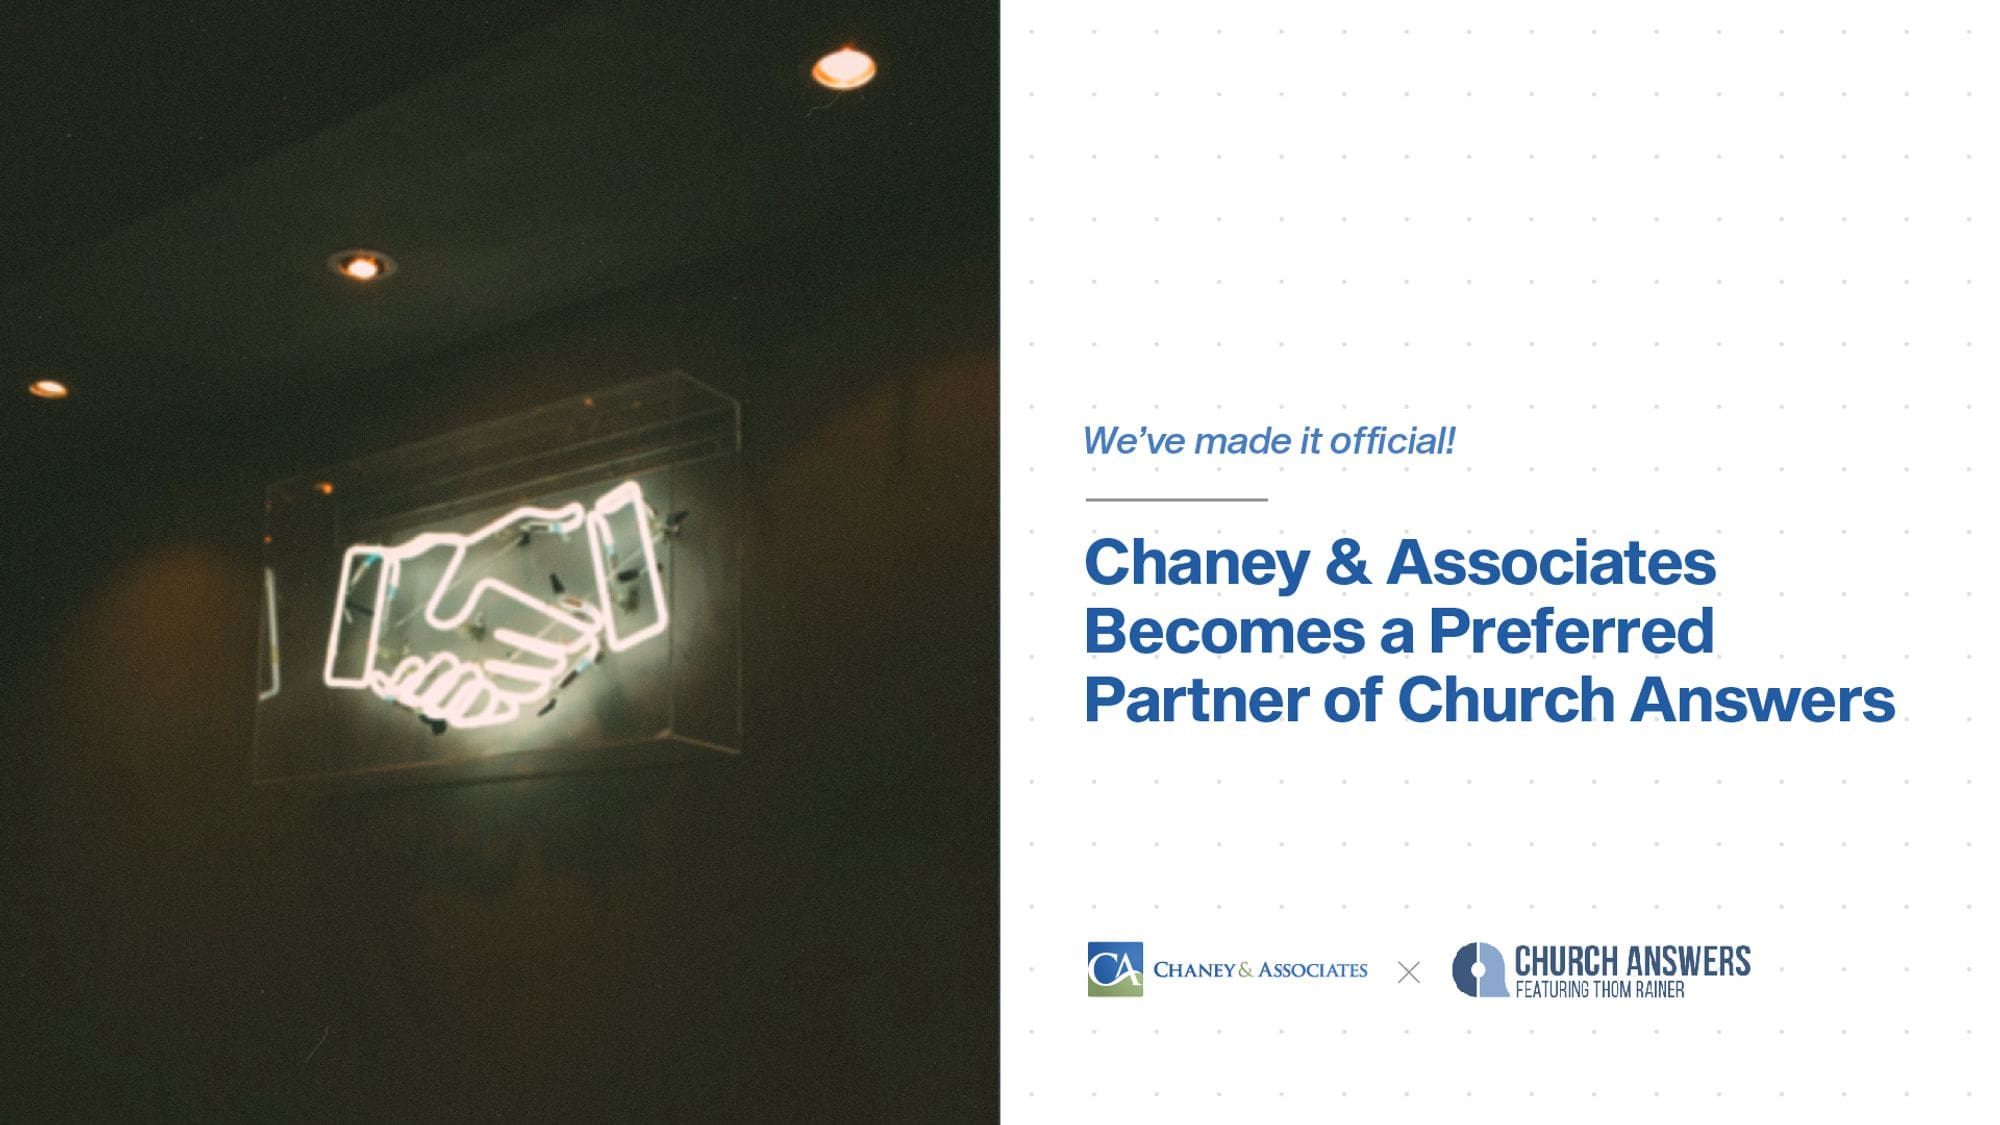 The Church-Focused Firm Has Become the Only Accounting Organization With the Prestigious Church Answers Designation of “Preferred Partner”